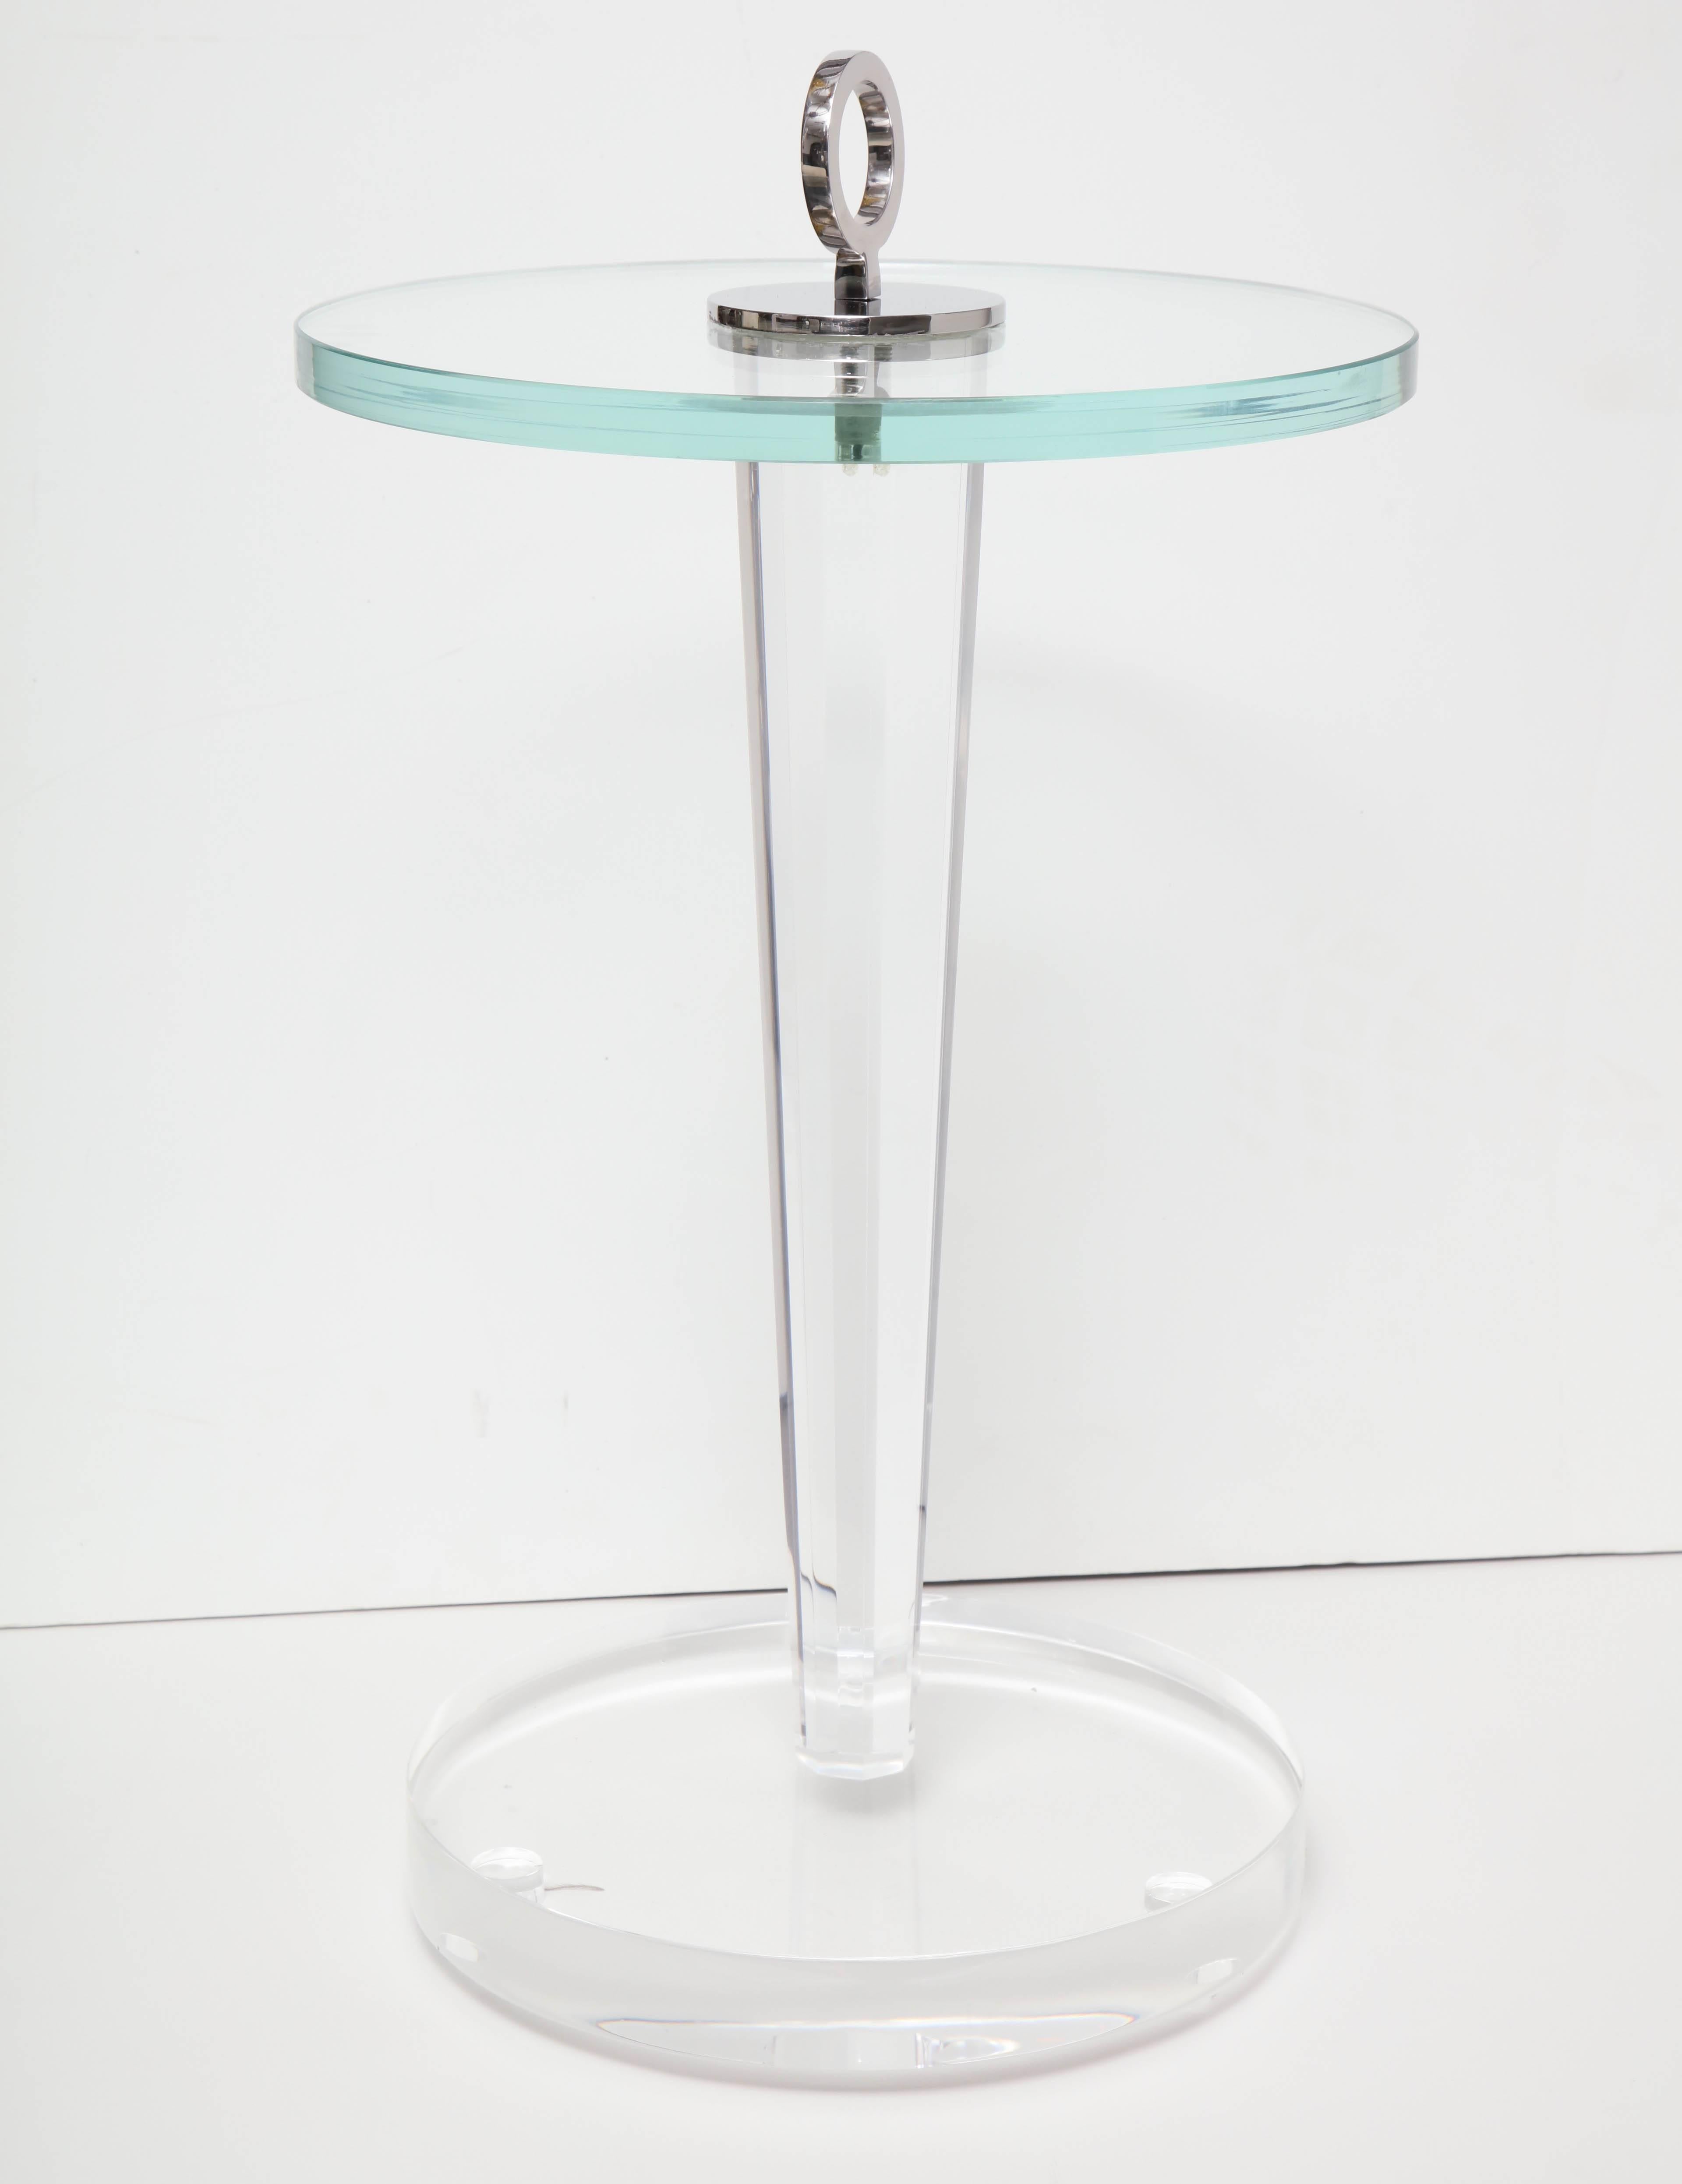 Custom acrylic occasional table with glass top and plated nickel ring. Customization is available in different sizes and finishes.